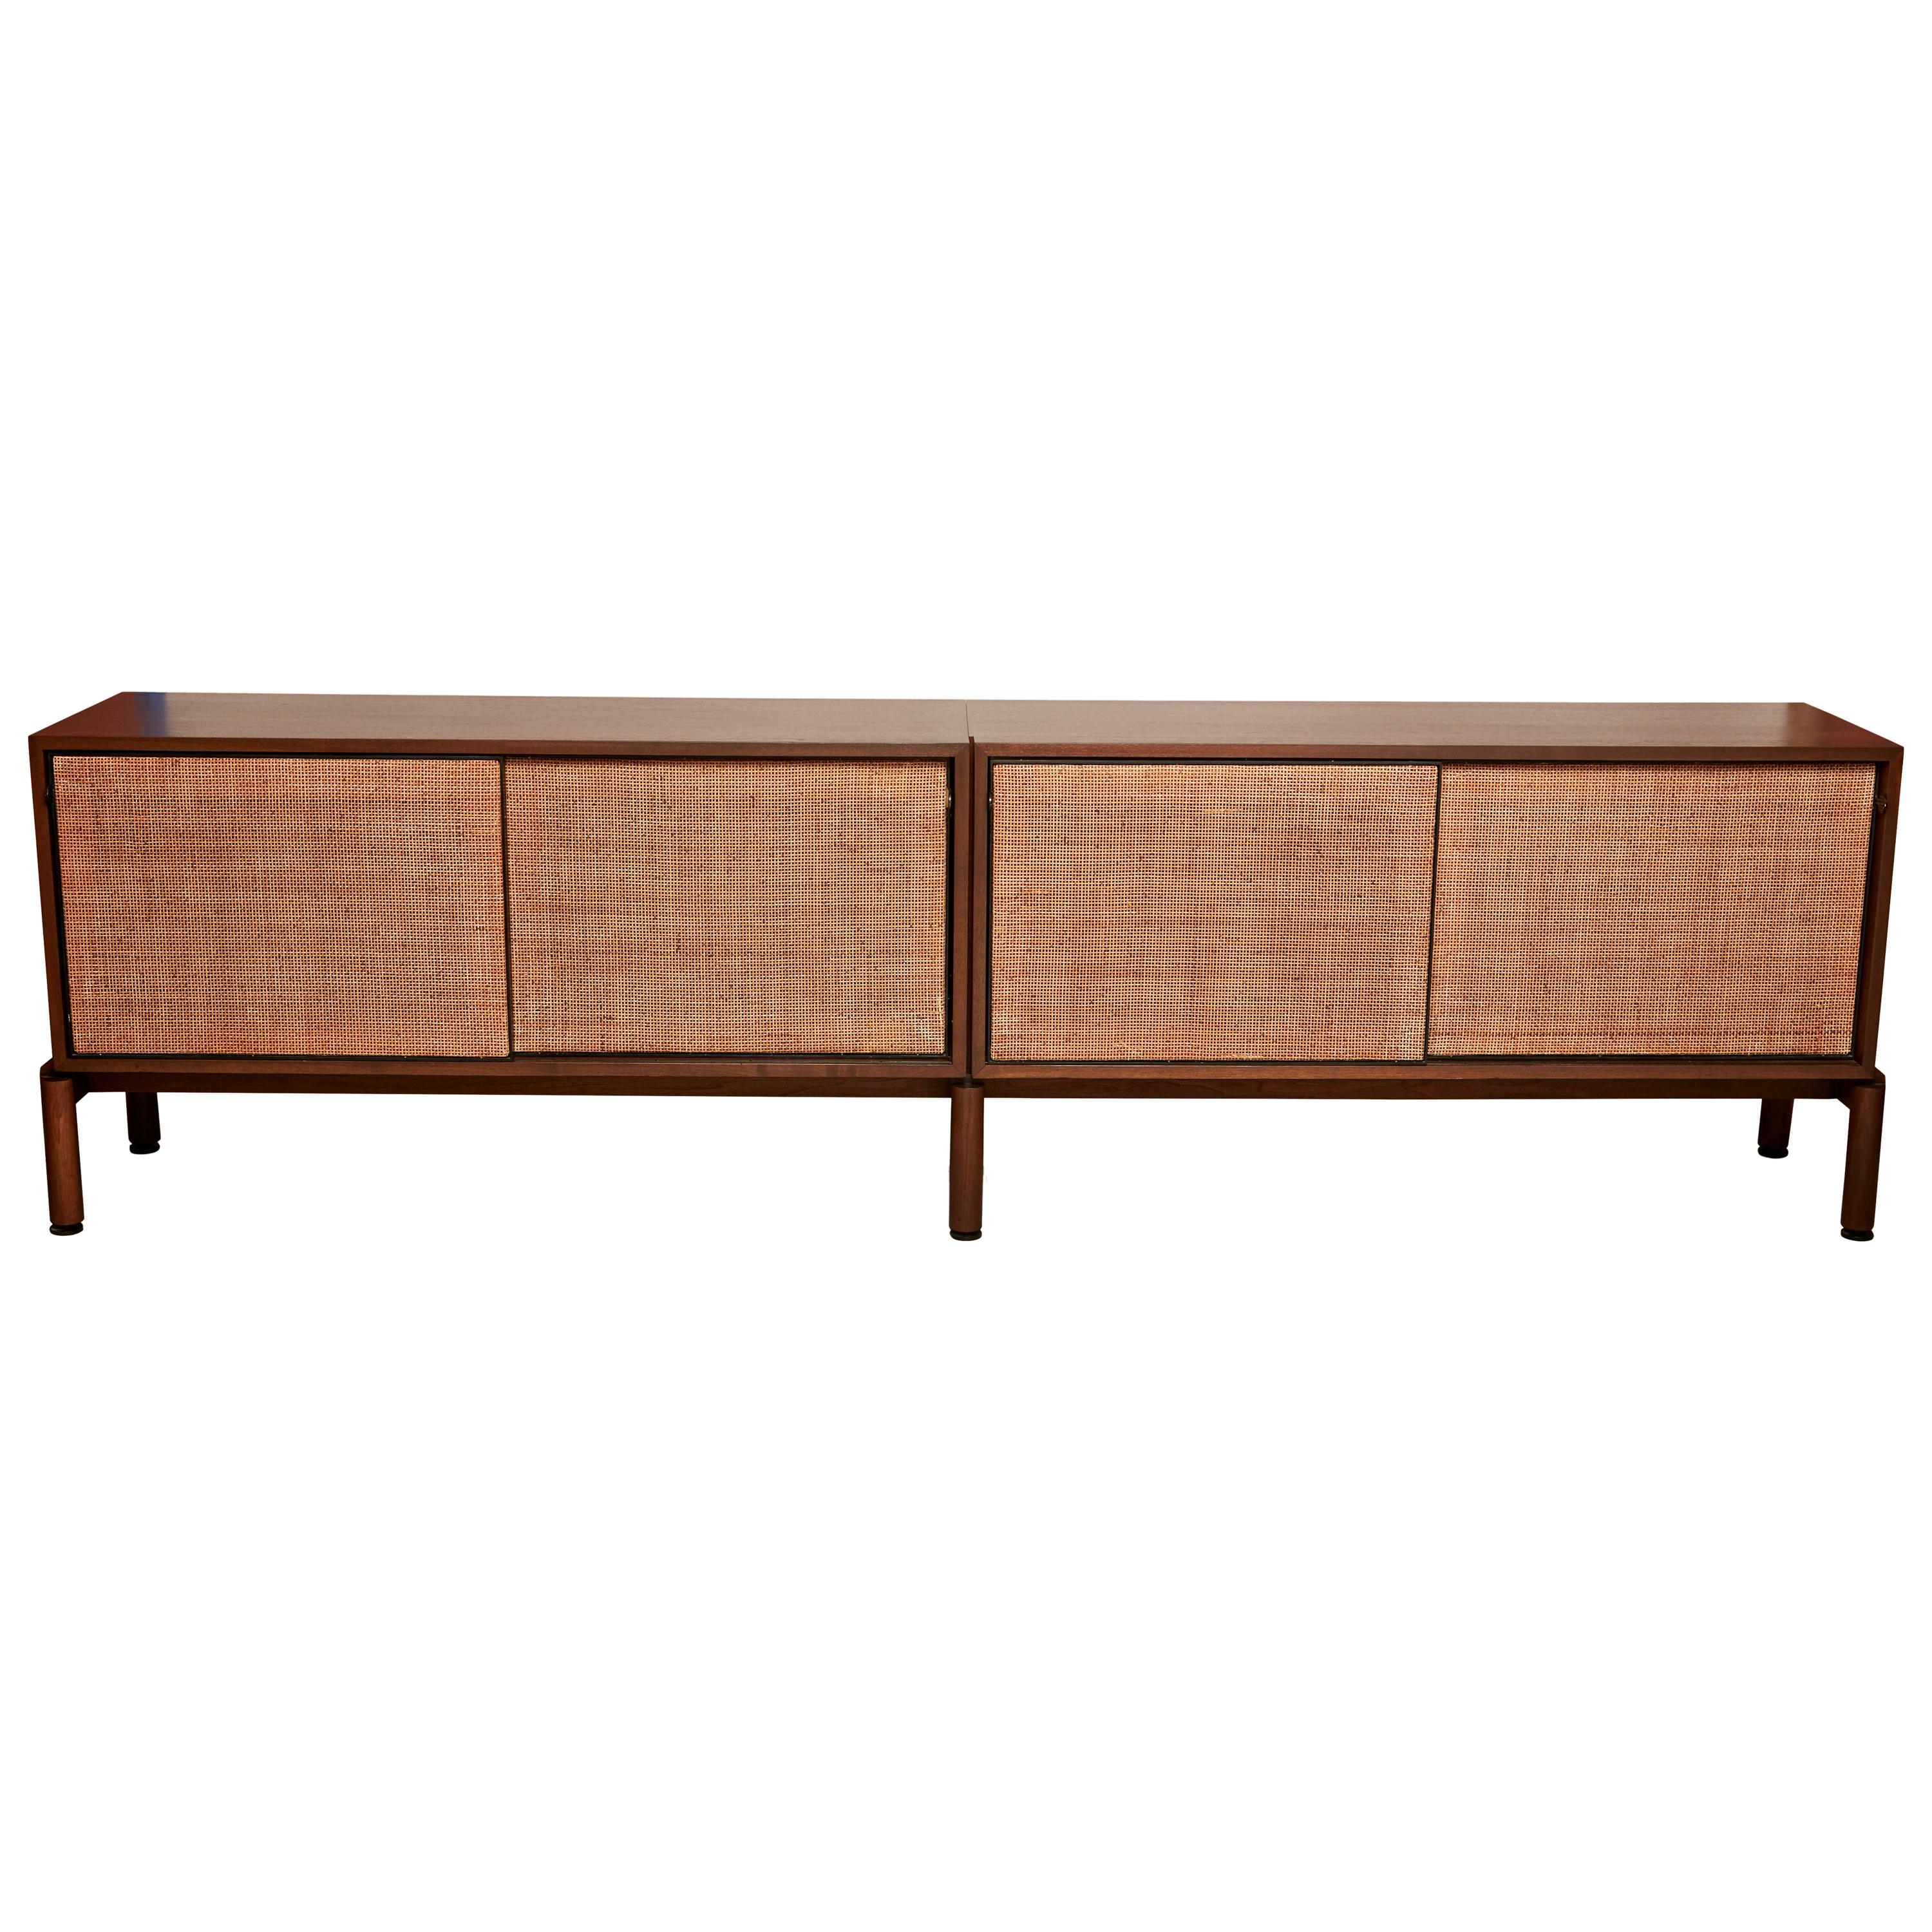 Italian Walnut Credenza with Caned Front